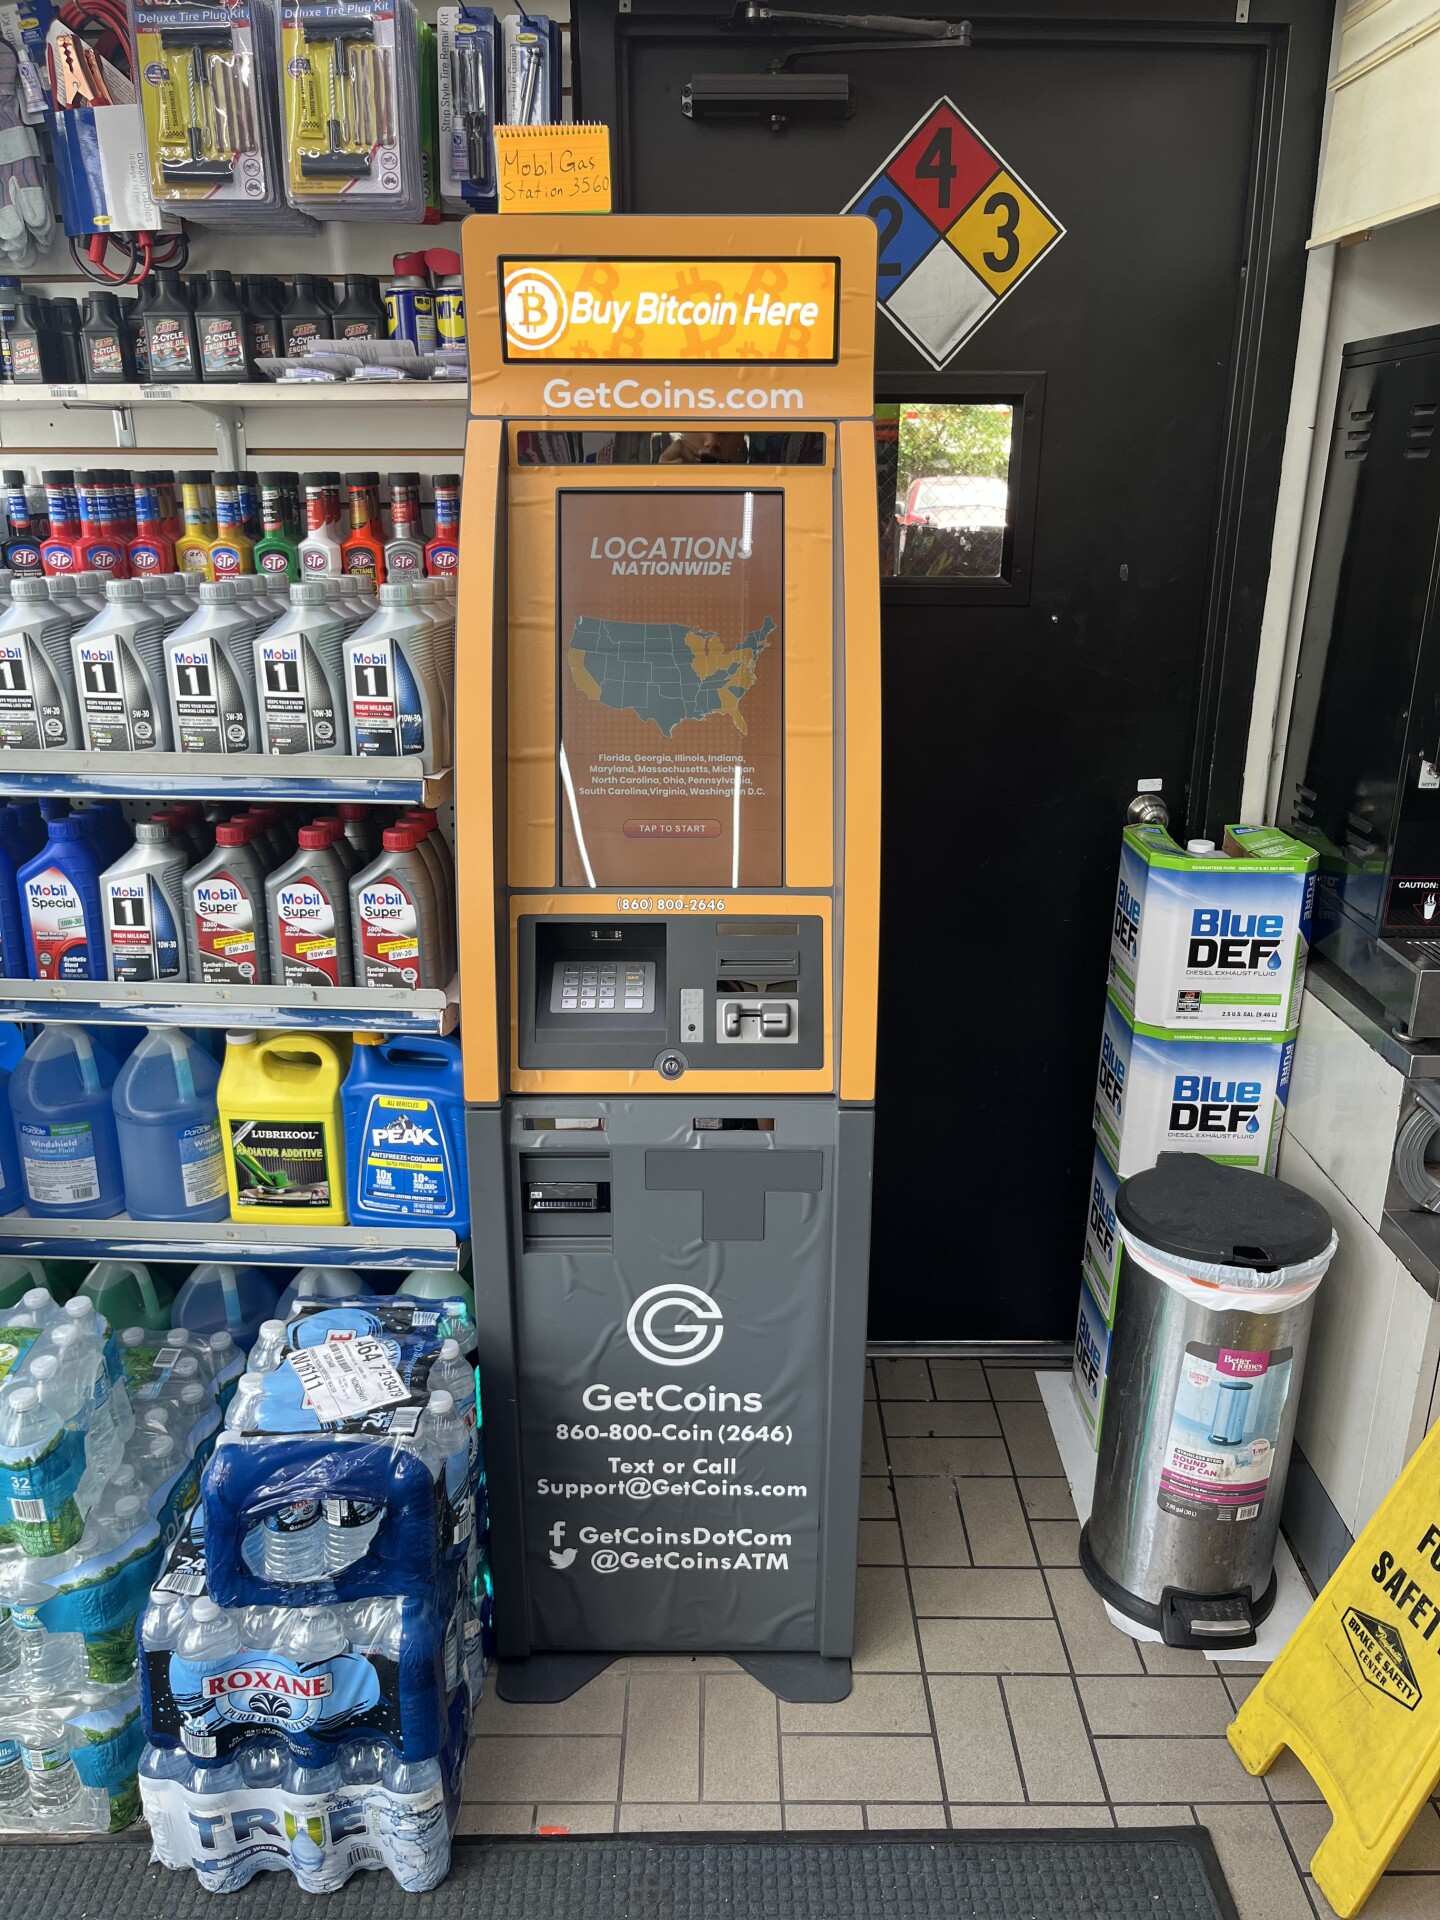 Getcoins - Bitcoin ATM - Inside of Mobil Mart in Pompano Beach, Florida